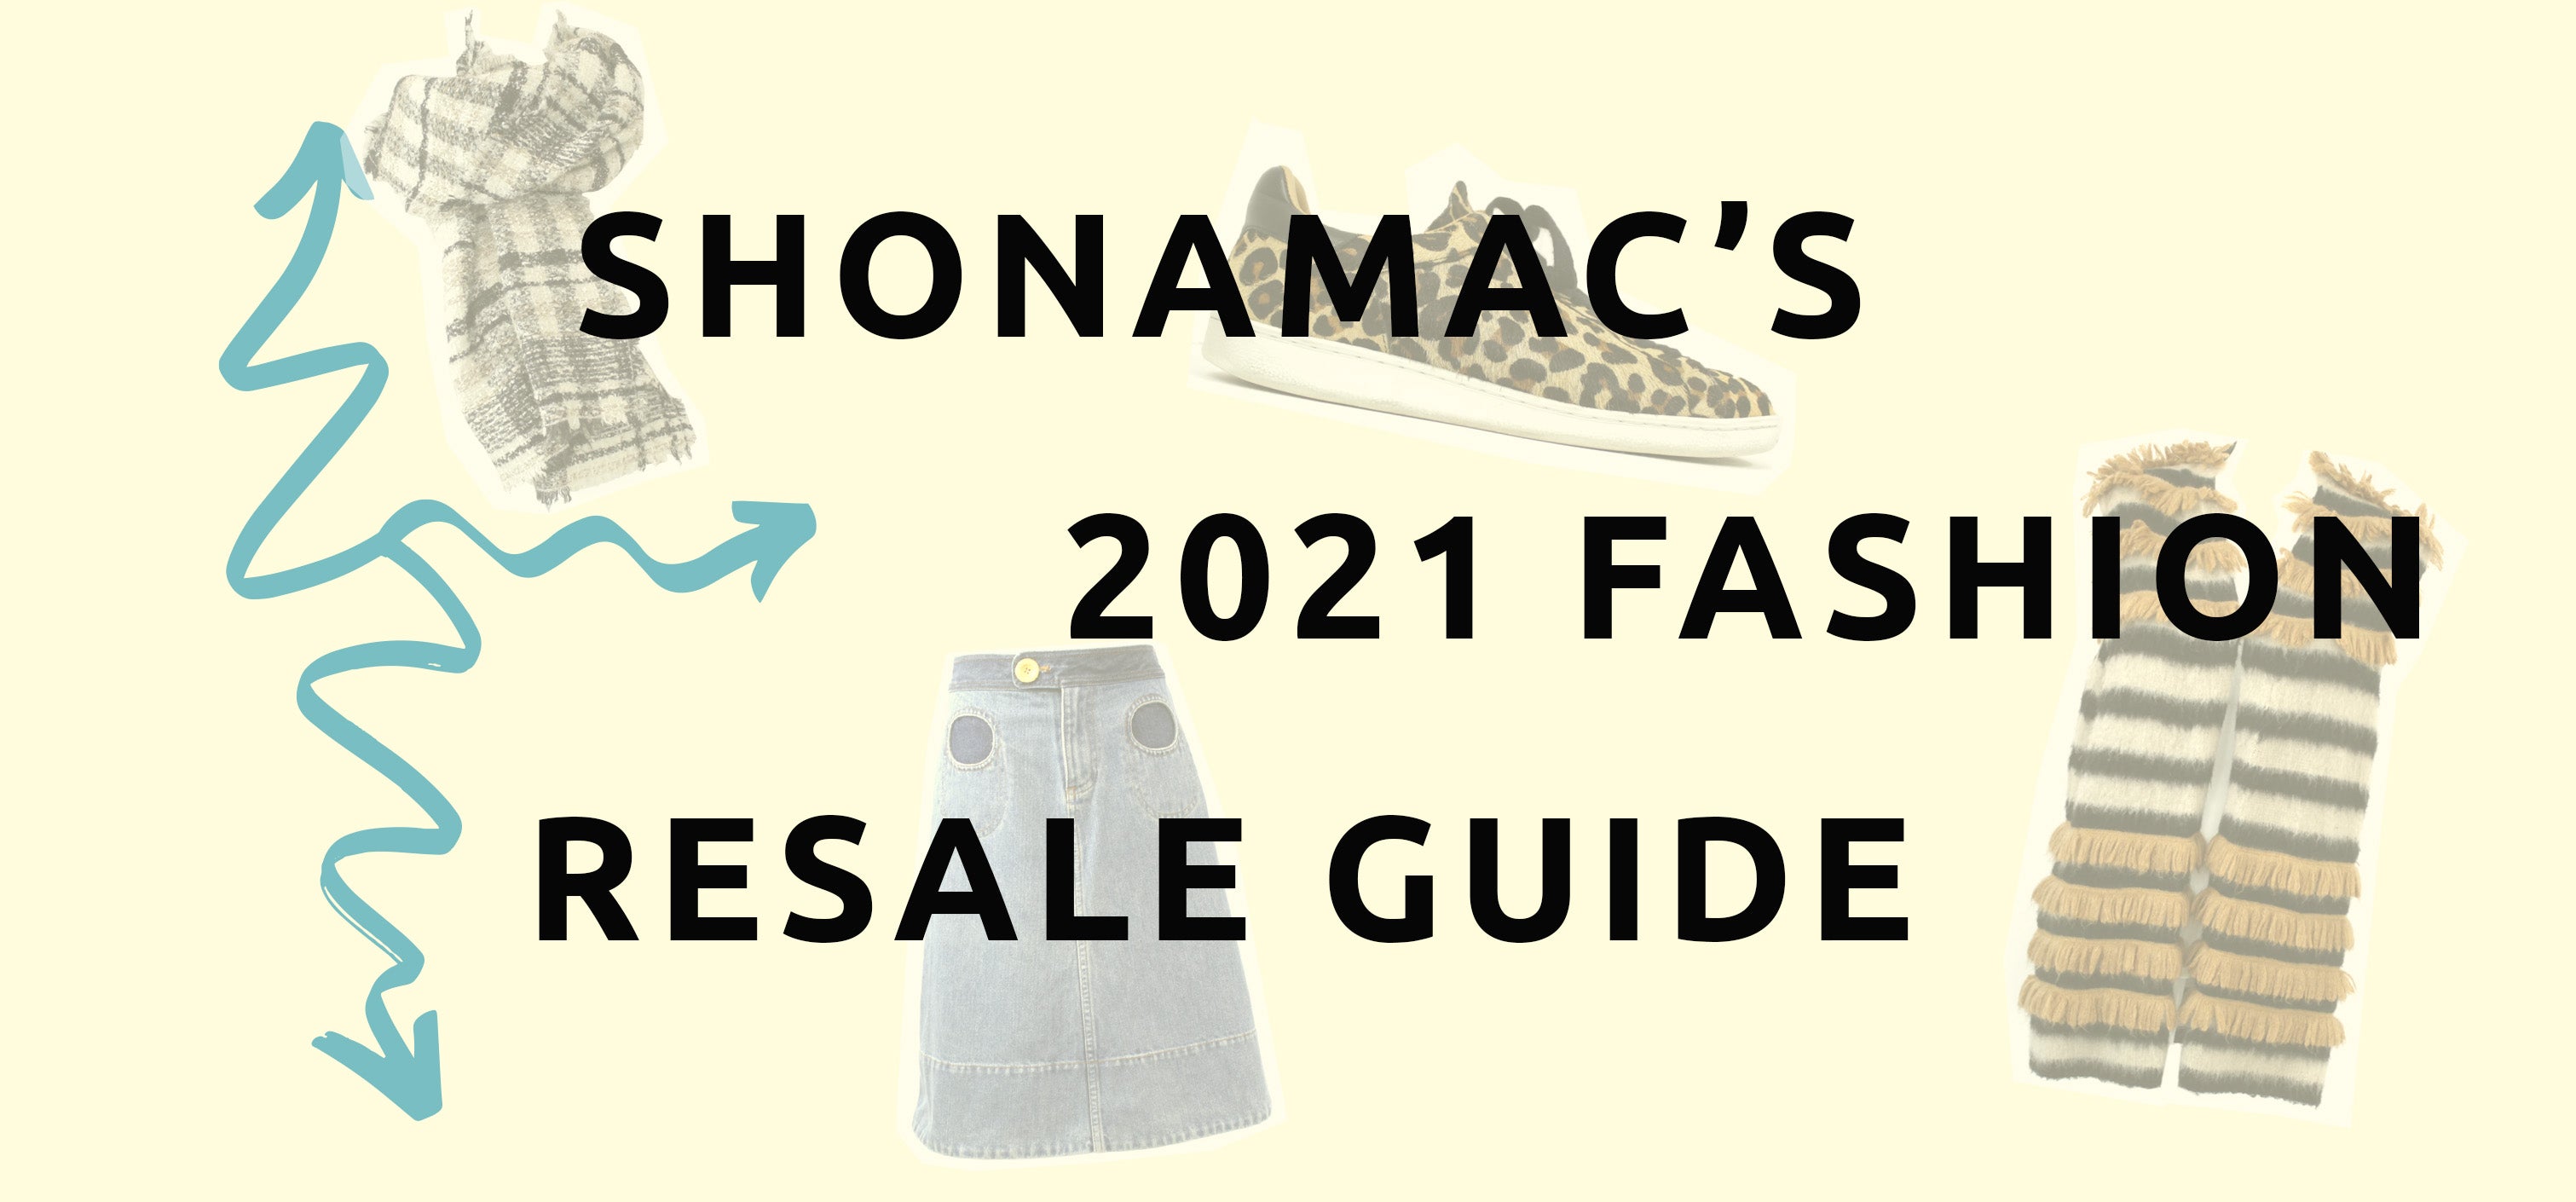 What are we looking to resell in 2021?